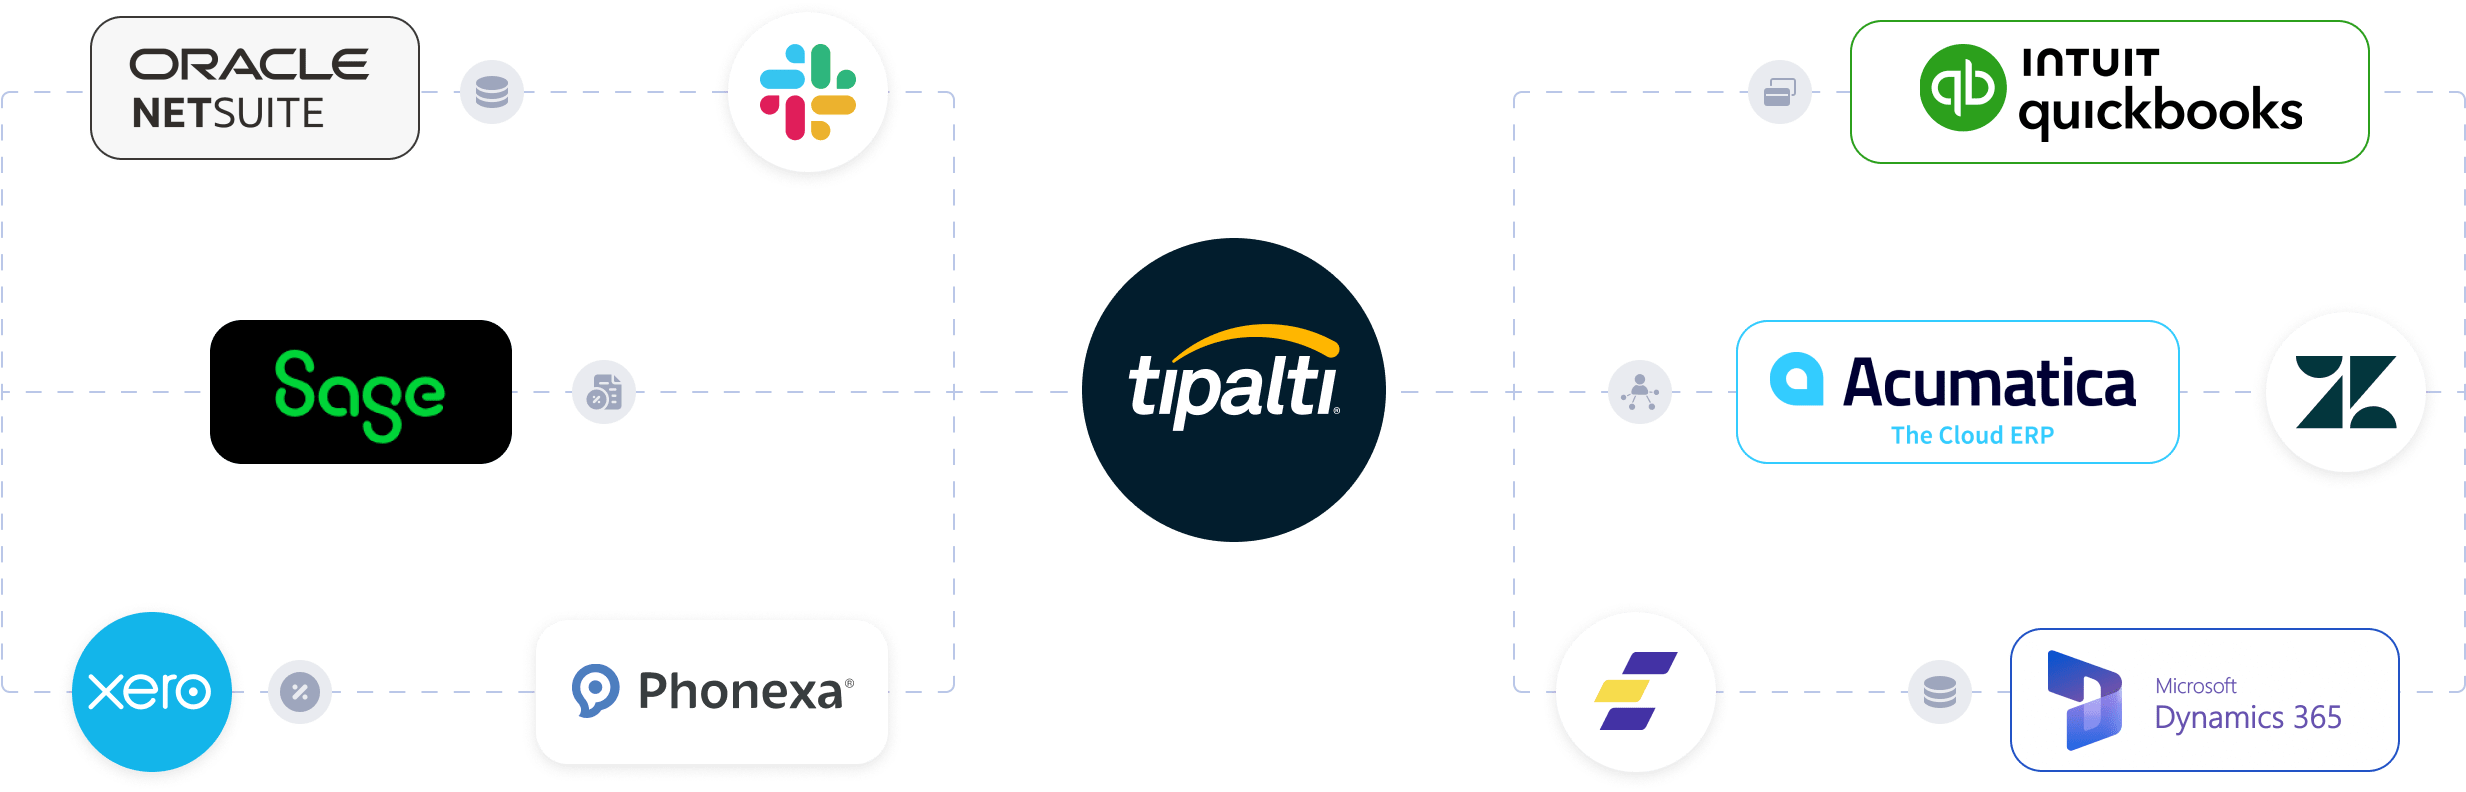 Diagram showing ERP and accounting software integrations with Tipalti